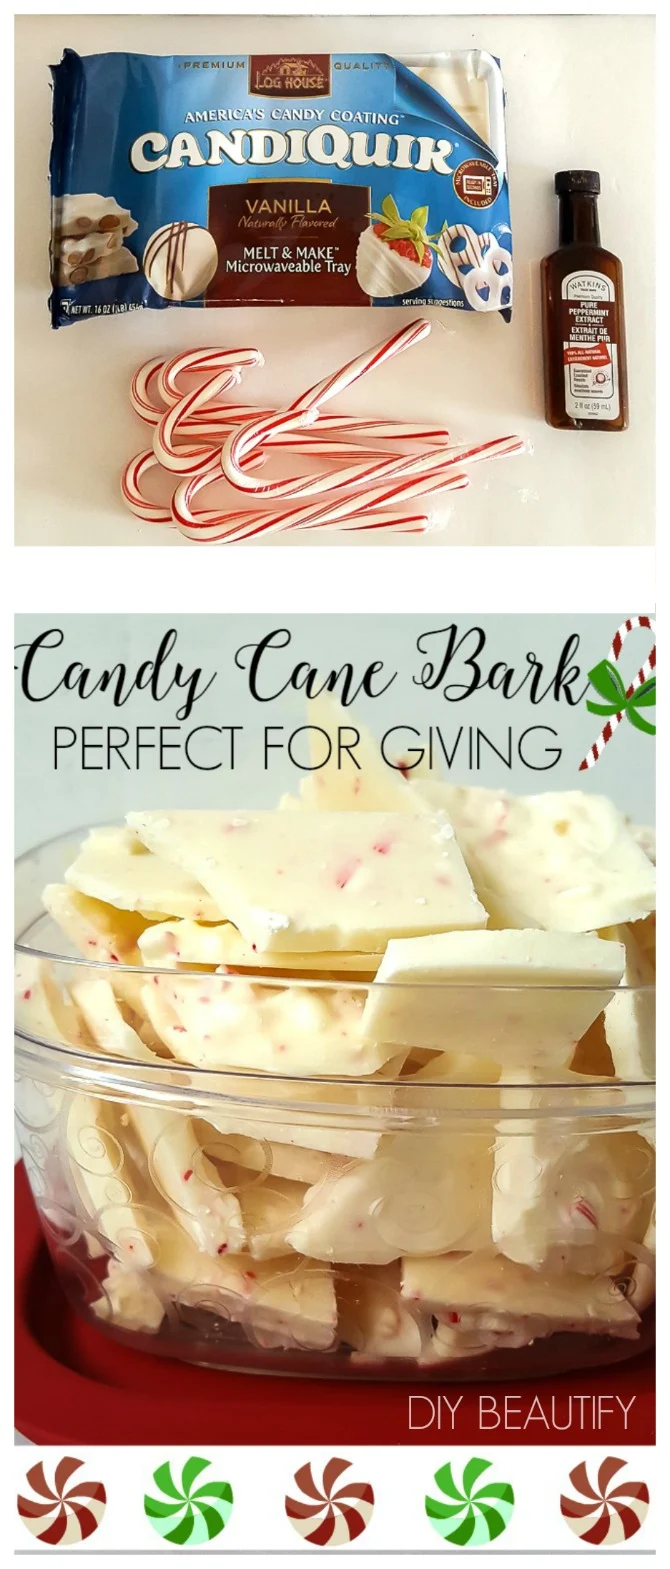 Simple 3-ingredient Candy Cane Bark is a perfect holiday treat for sharing! Find more at diy beautify!